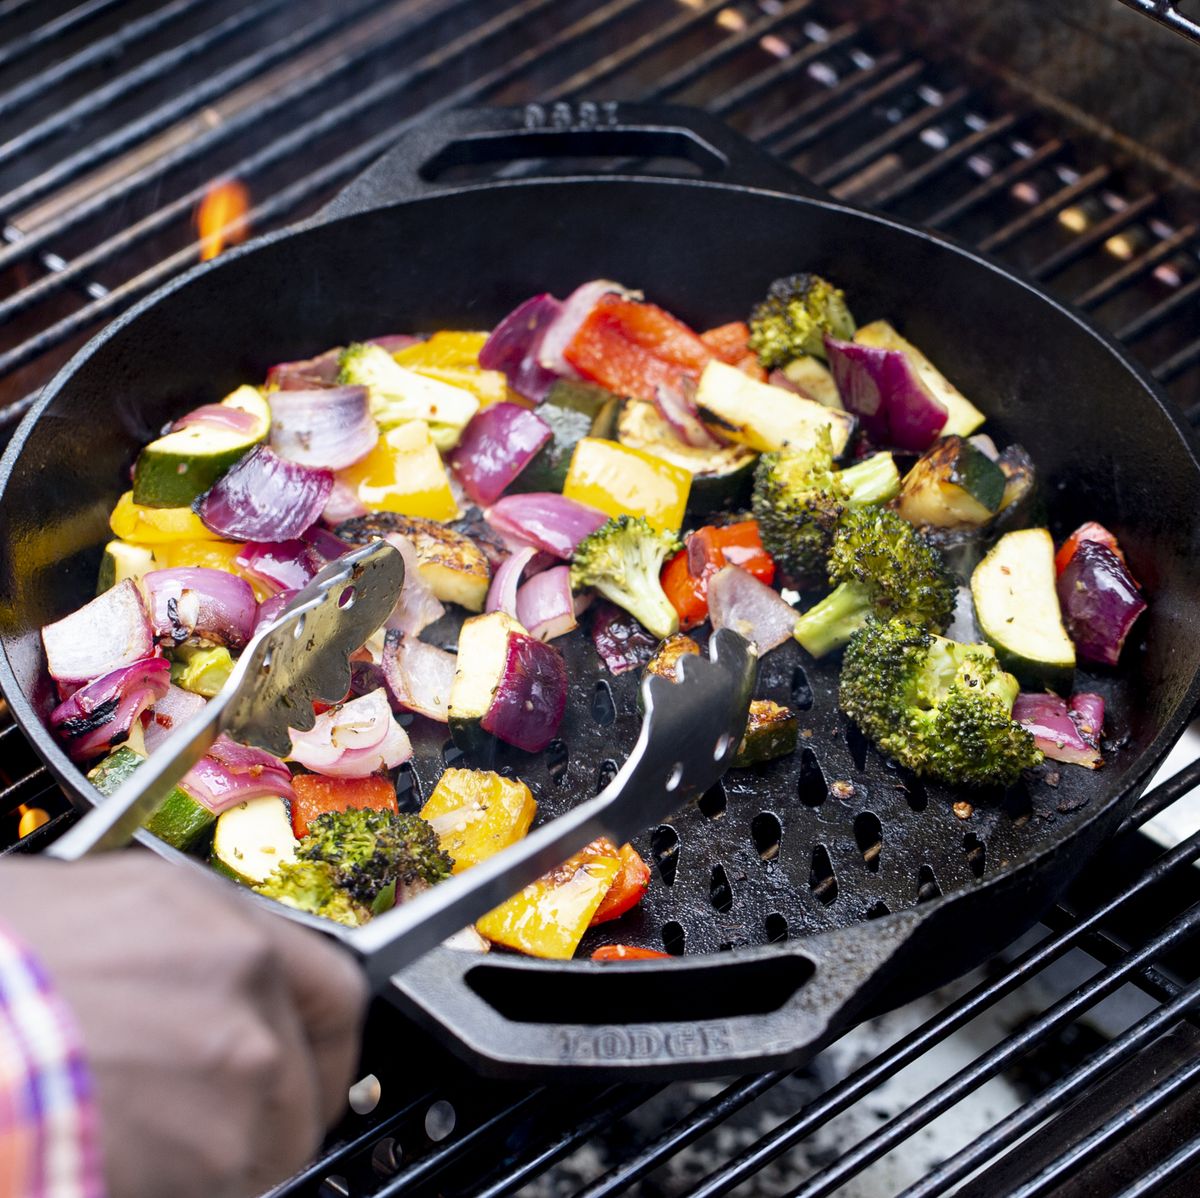 Lodge's Cast Iron Grill Press Will Help You make the Best Grilled